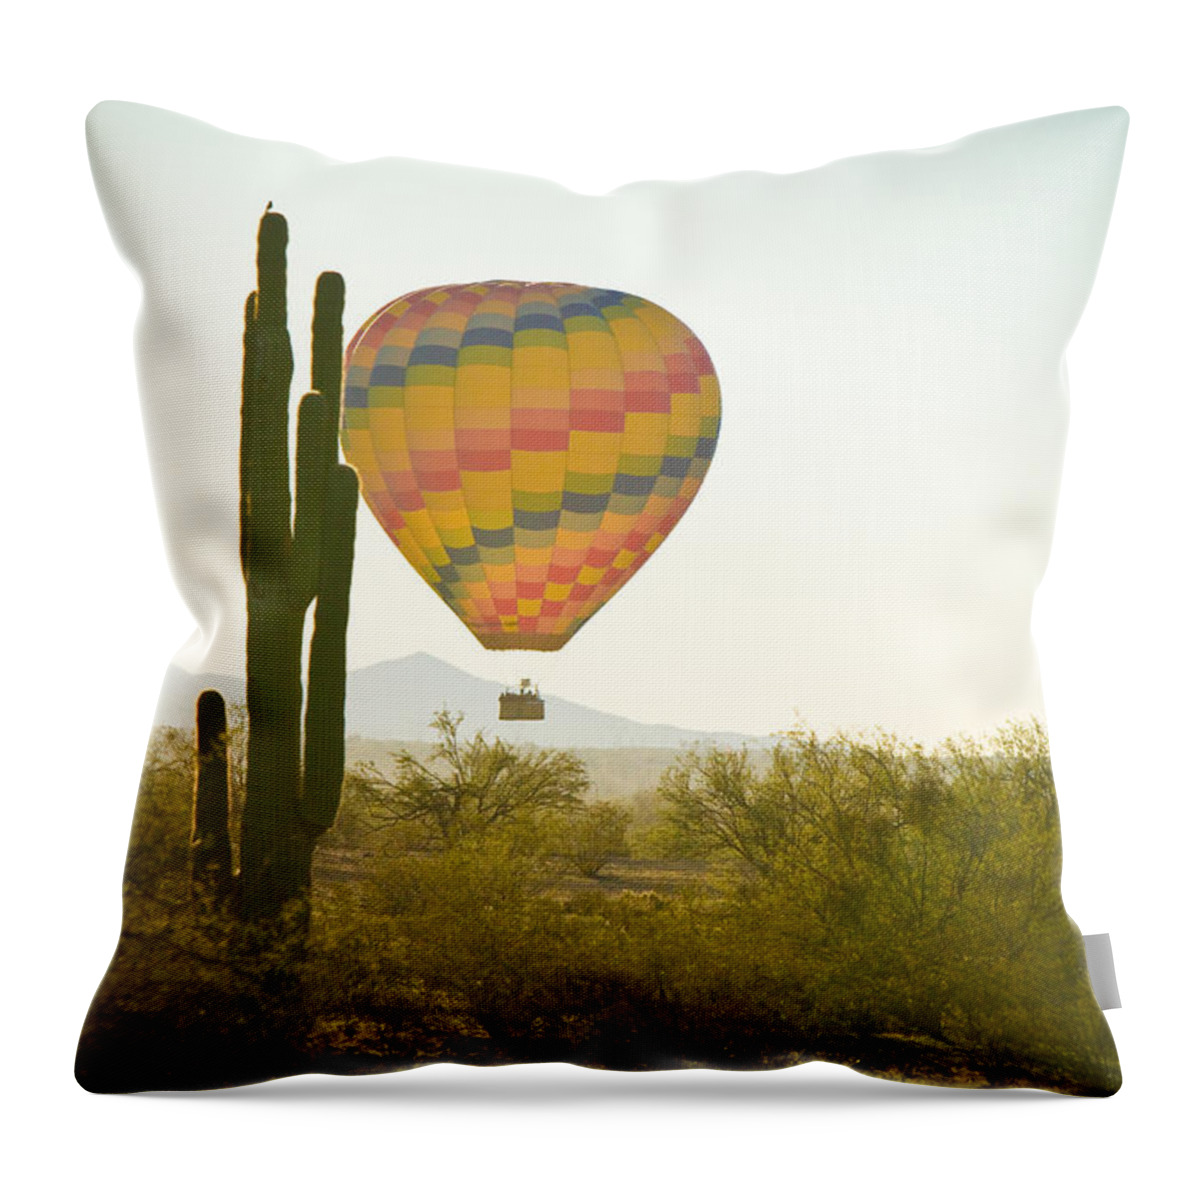 Arizona Throw Pillow featuring the photograph Hot Air Balloon over the Arizona Desert With Giant Saguaro by James BO Insogna